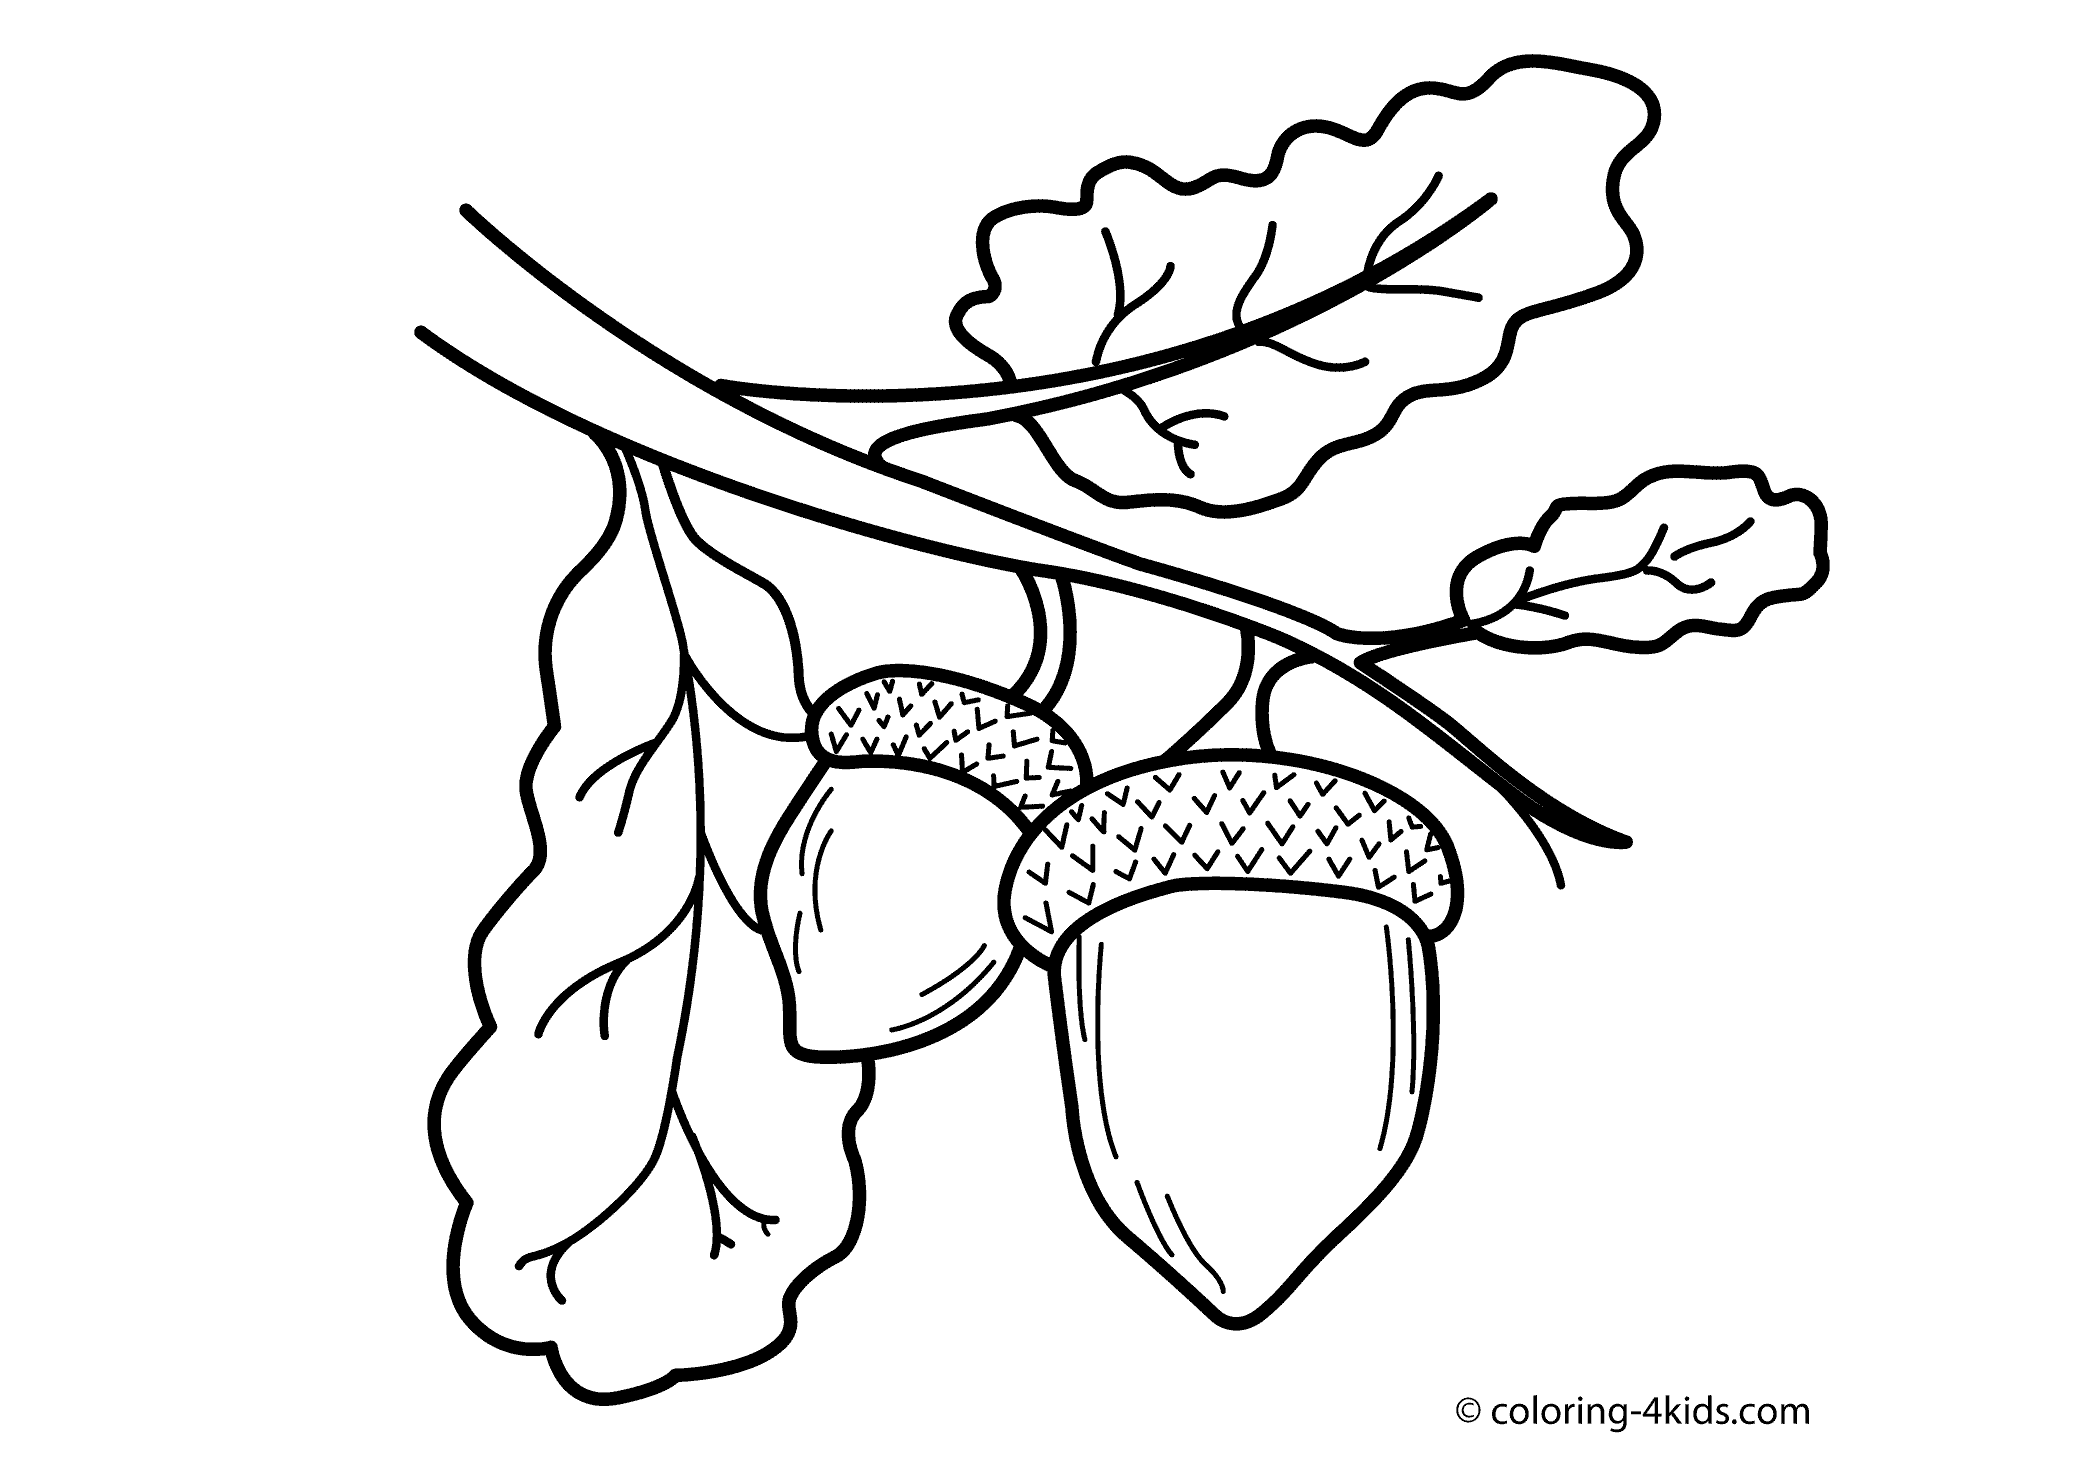 oak-leaves-and-acorns-drawing-clip-art-library